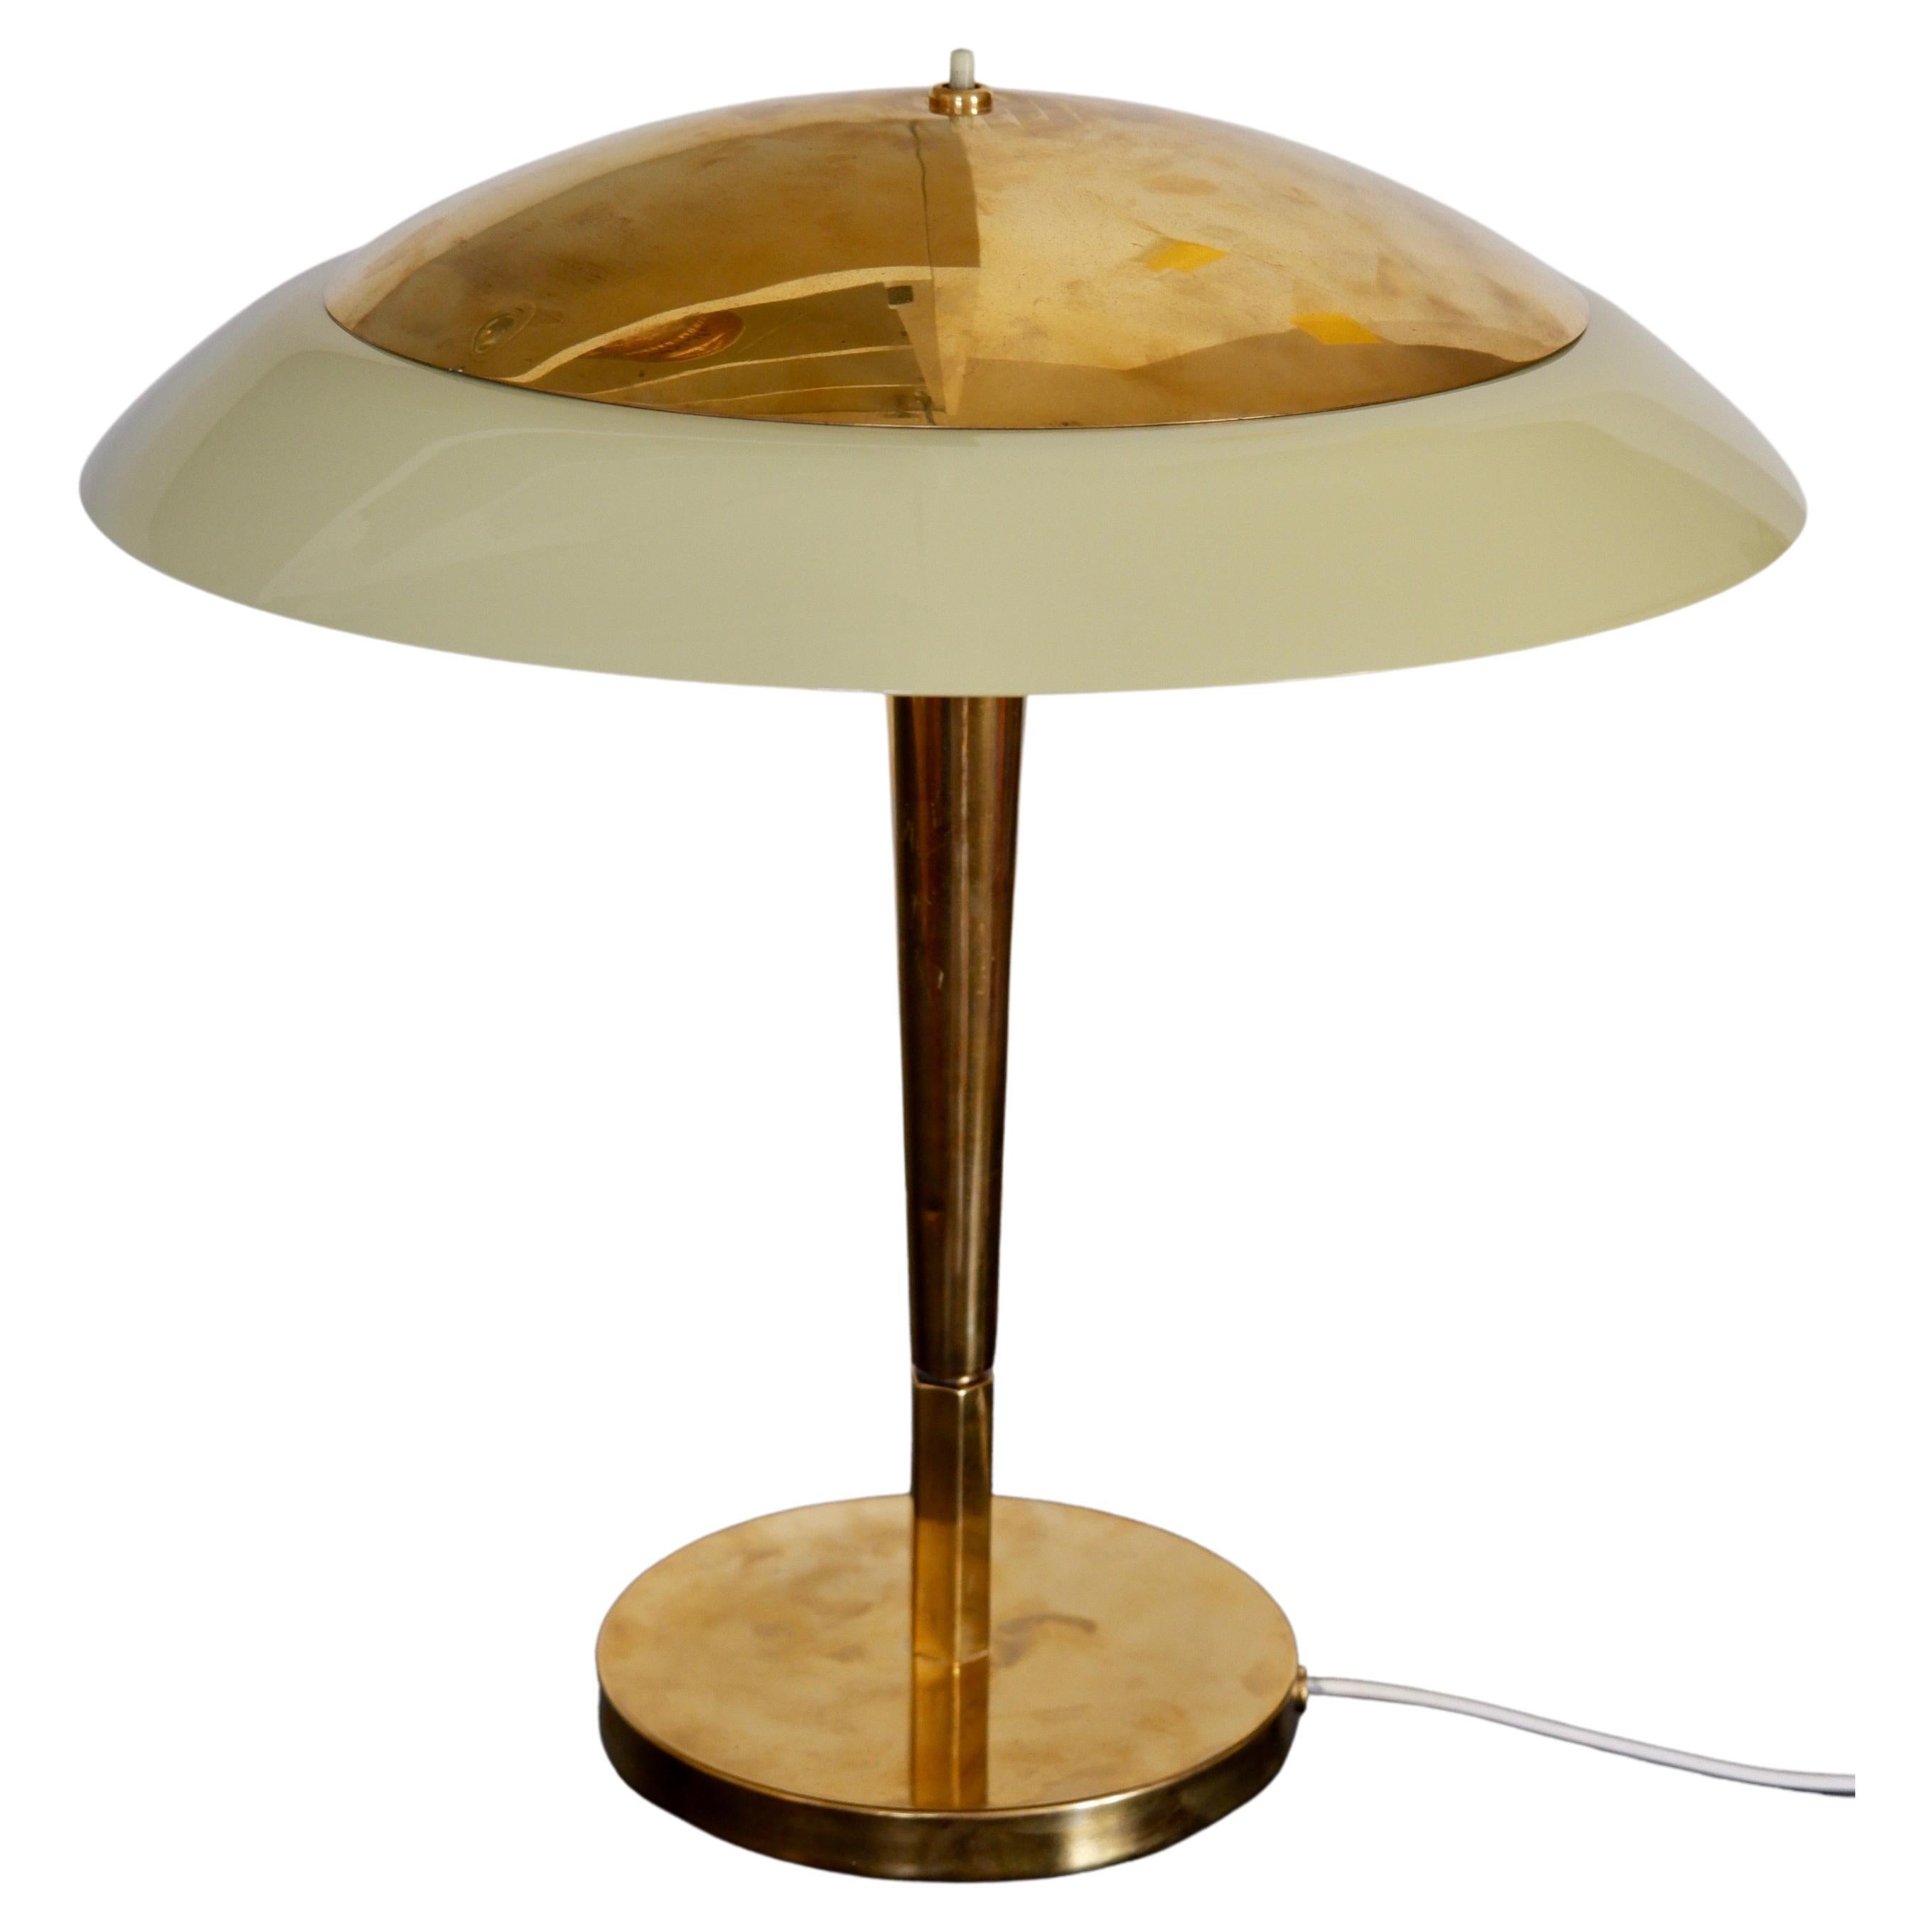 Paavo Tynell Table Lamp Model 5061 for Taito Brass and Opaline